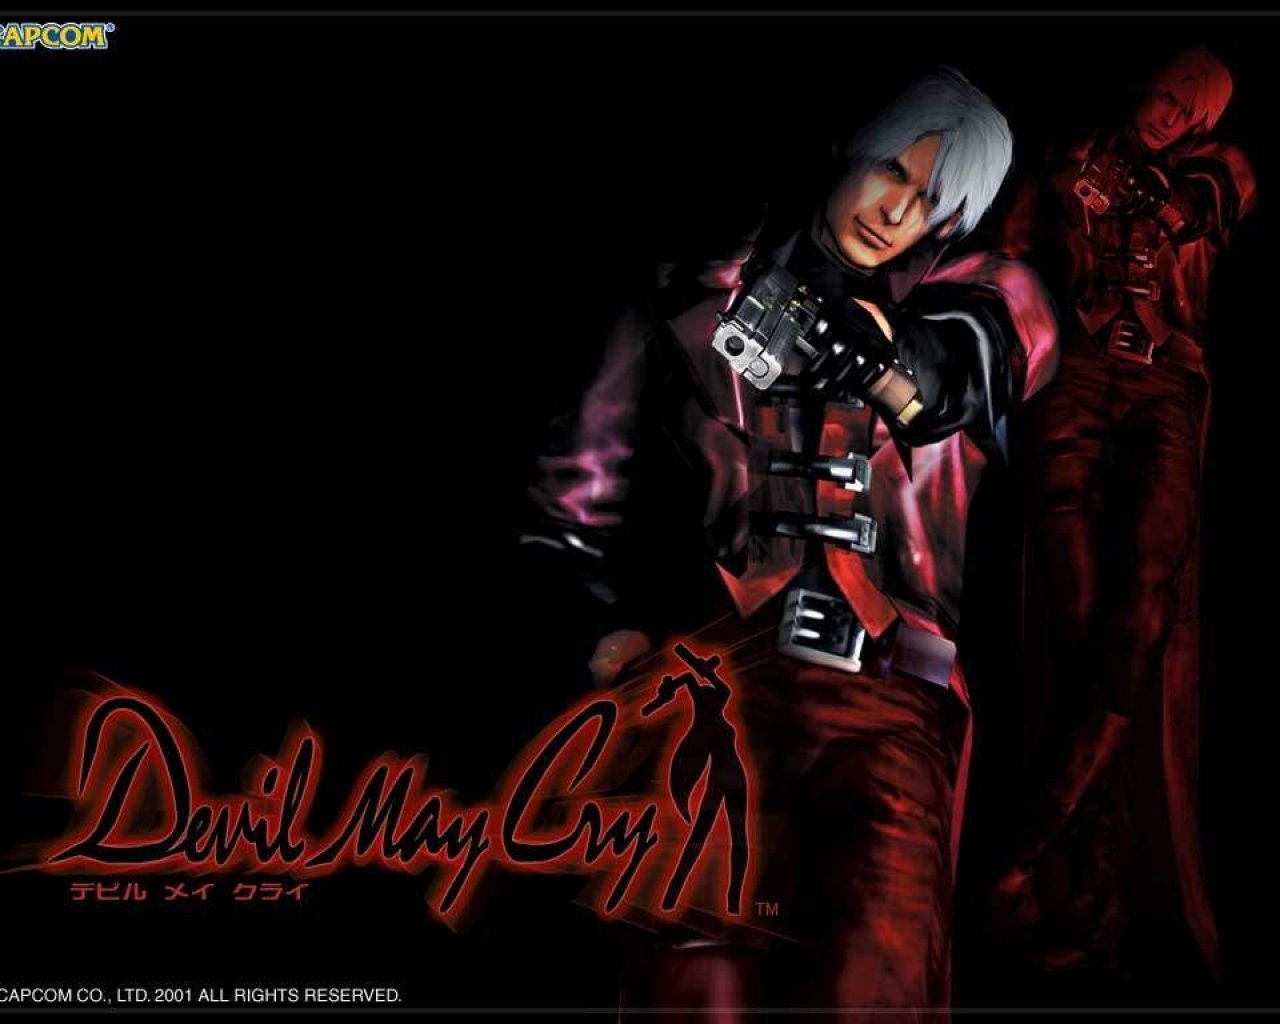 Devil May Cry Wallpapers - Download Devil May Cry Wallpapers - Devil May Cry 